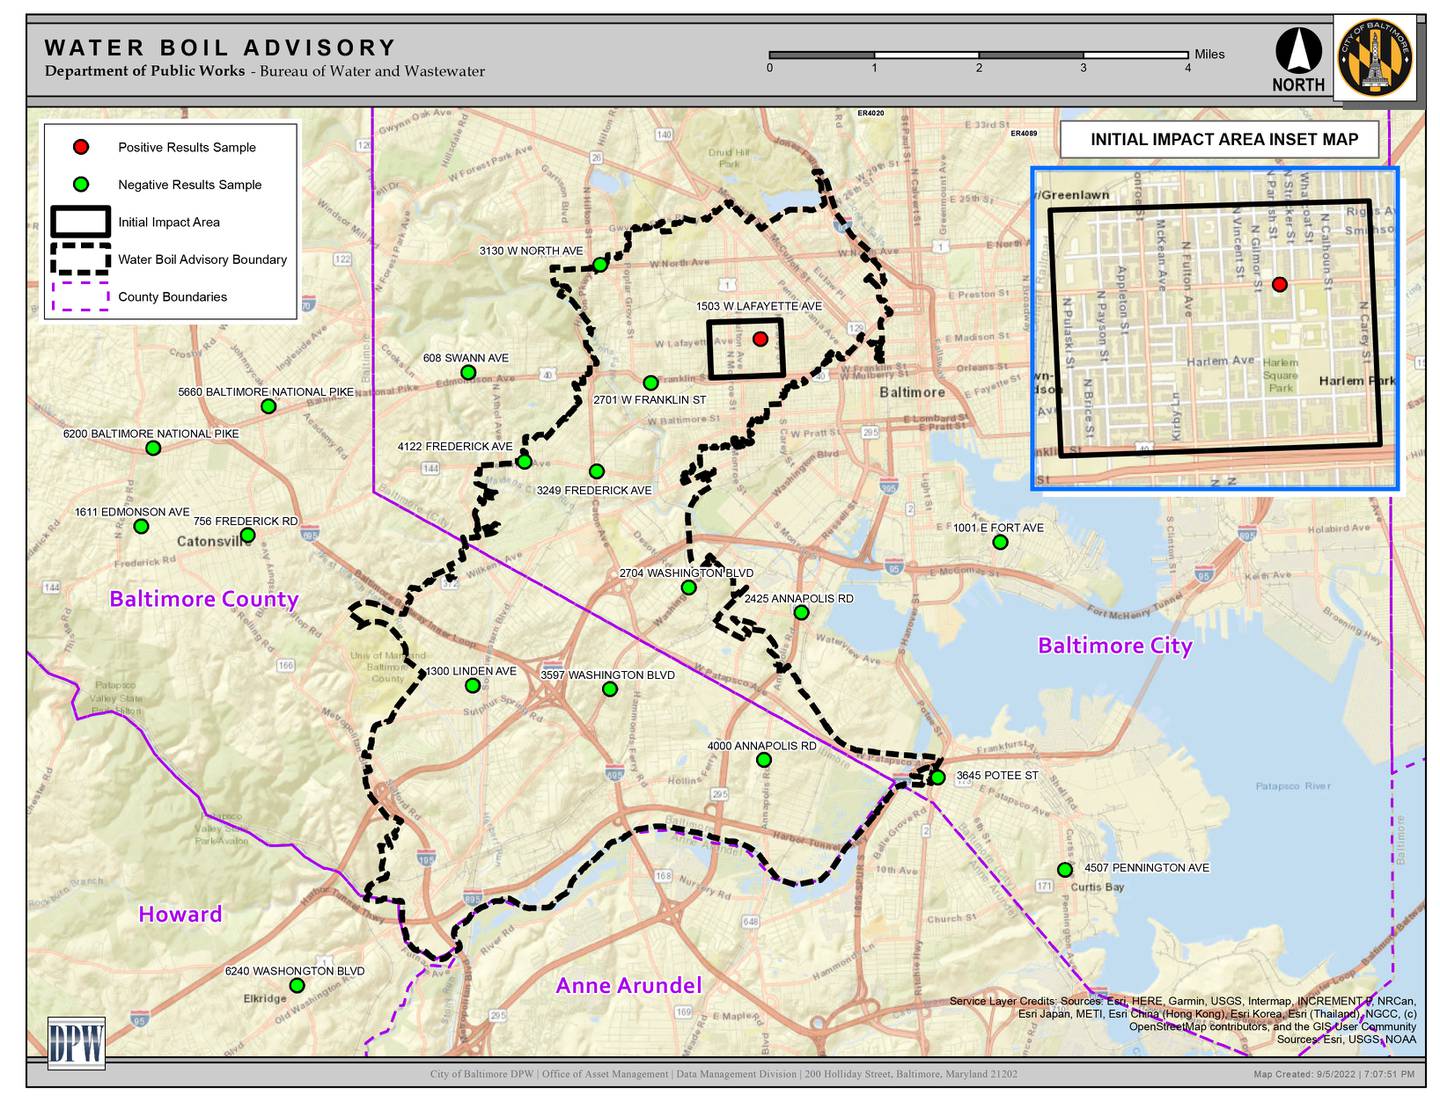 An updated map of the area that is under a water boil advisory by the Department of Public Works.